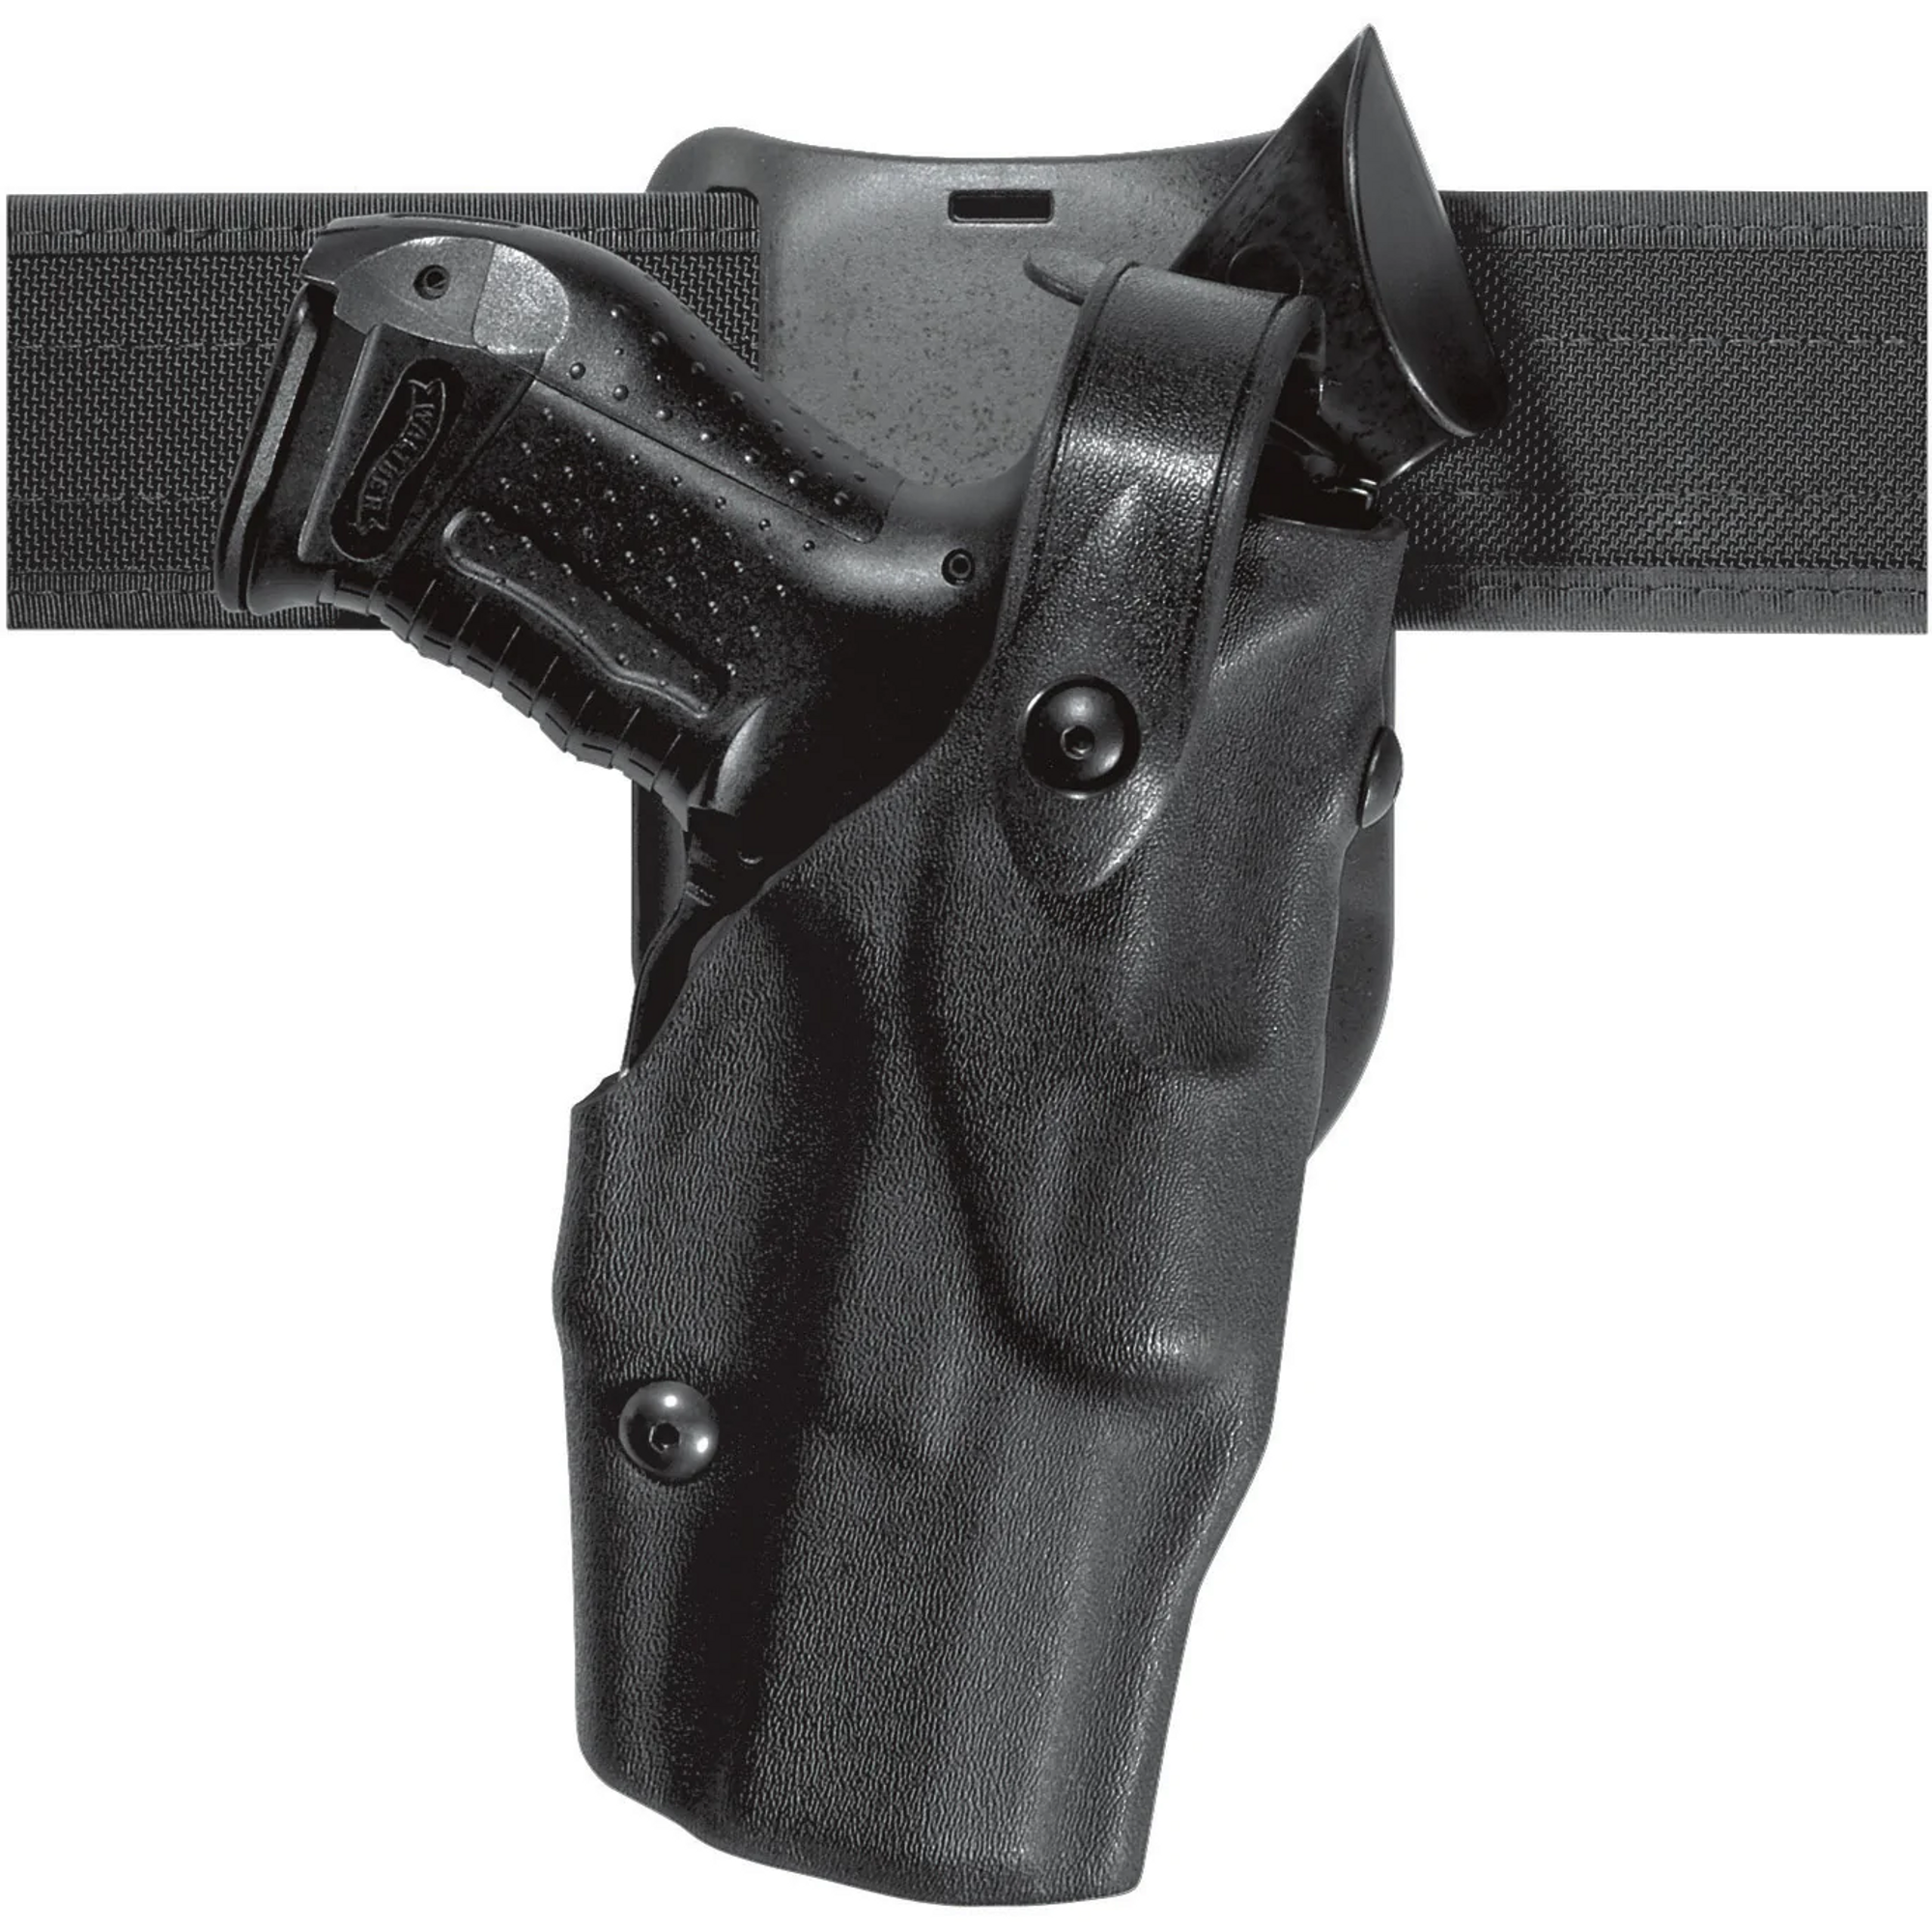 Model 6365 Als Low-ride, Level Iii Retention Duty Holster W/ Sls For Smith & Wesson M&p 45 W/ Light